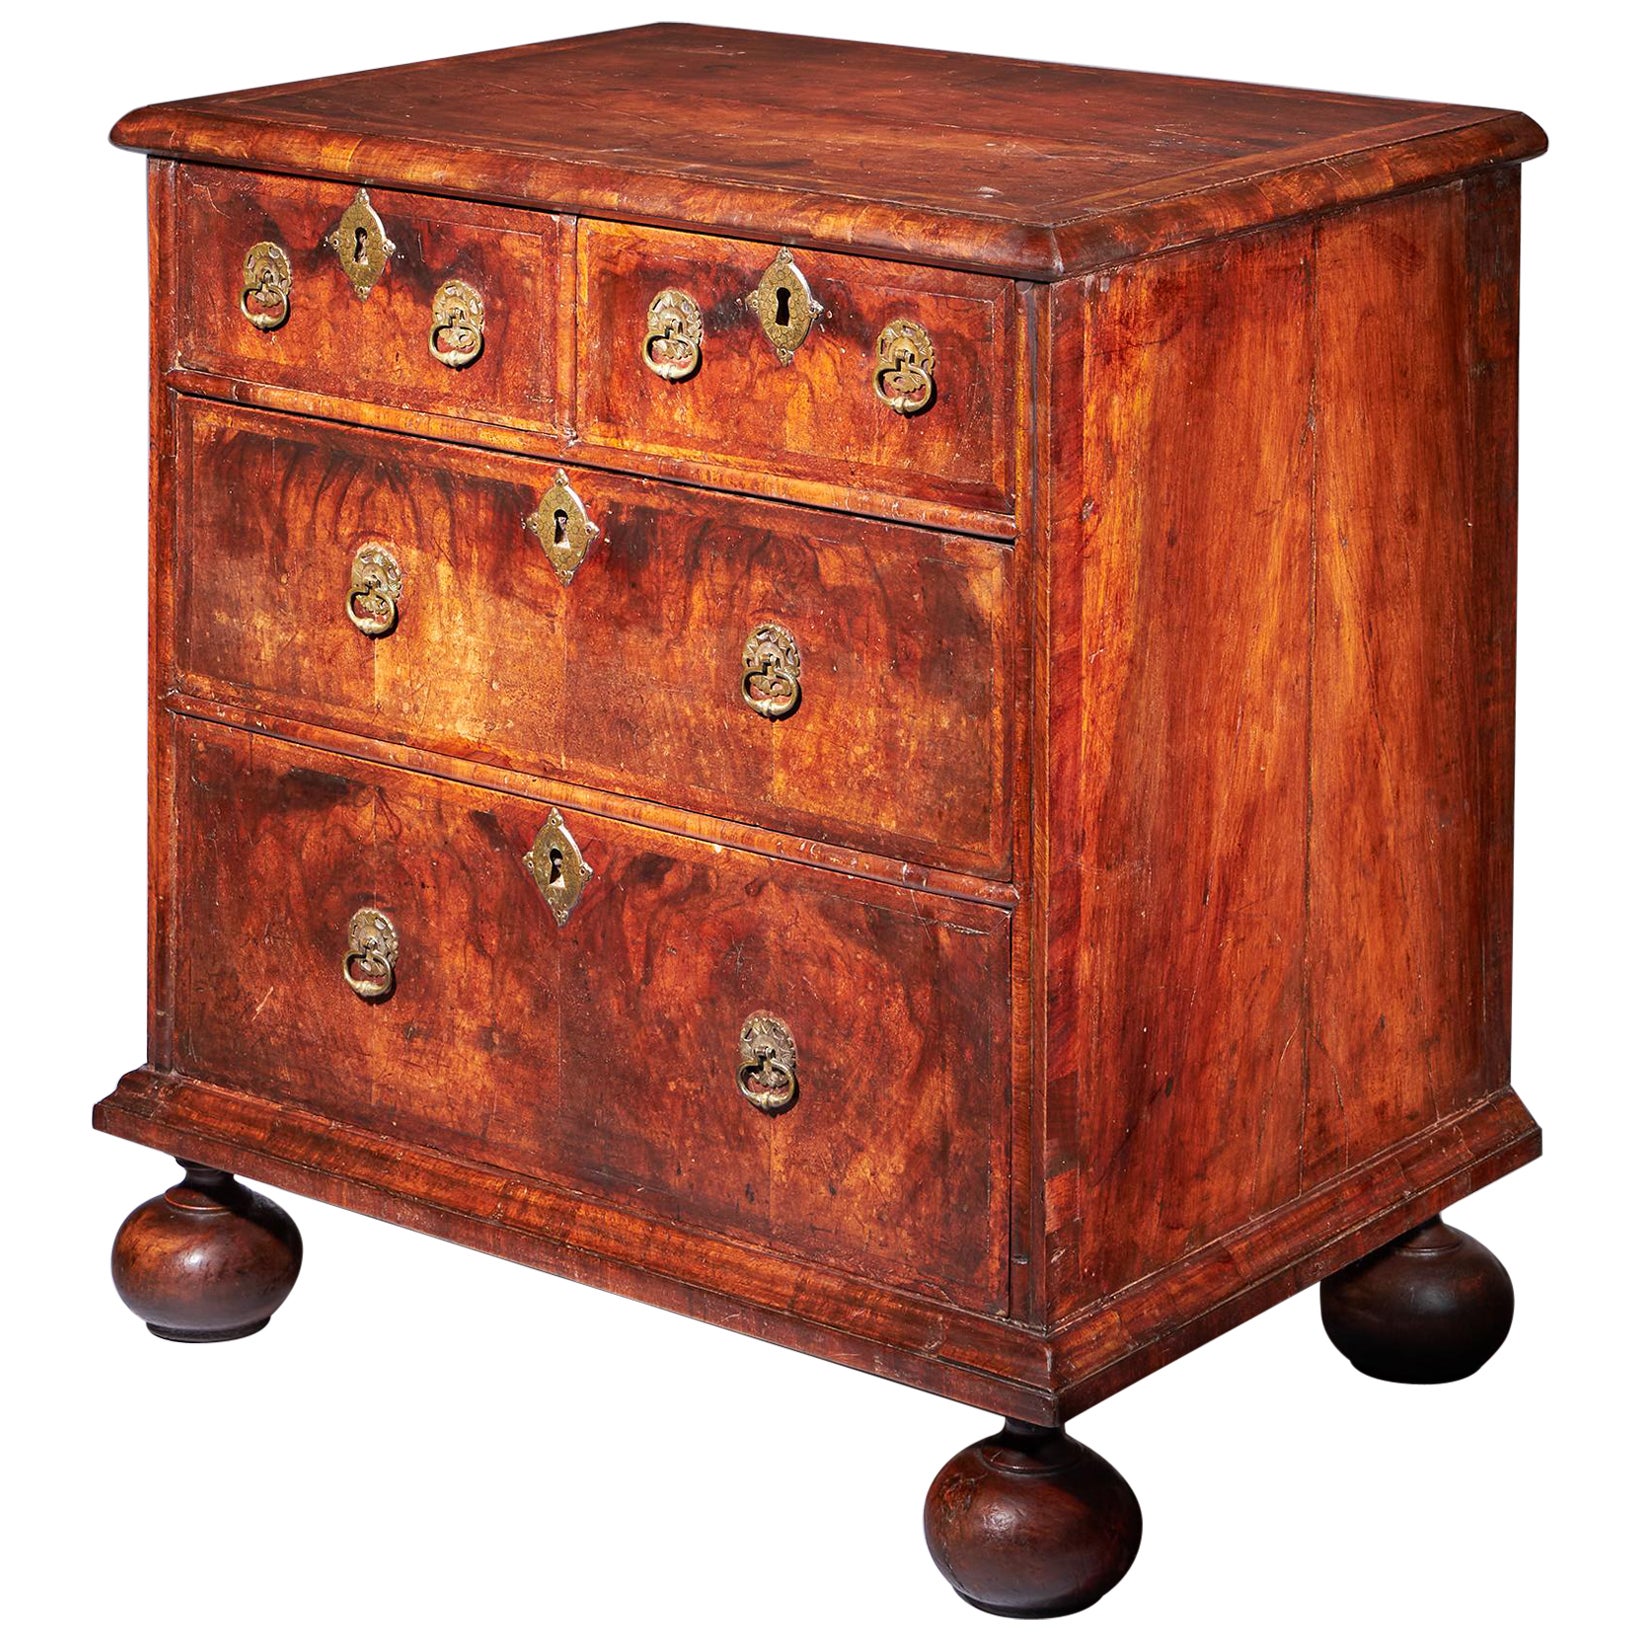 A Small and Rare William and Marry Figured Walnut Chest of Drawers, Circa 1690. 